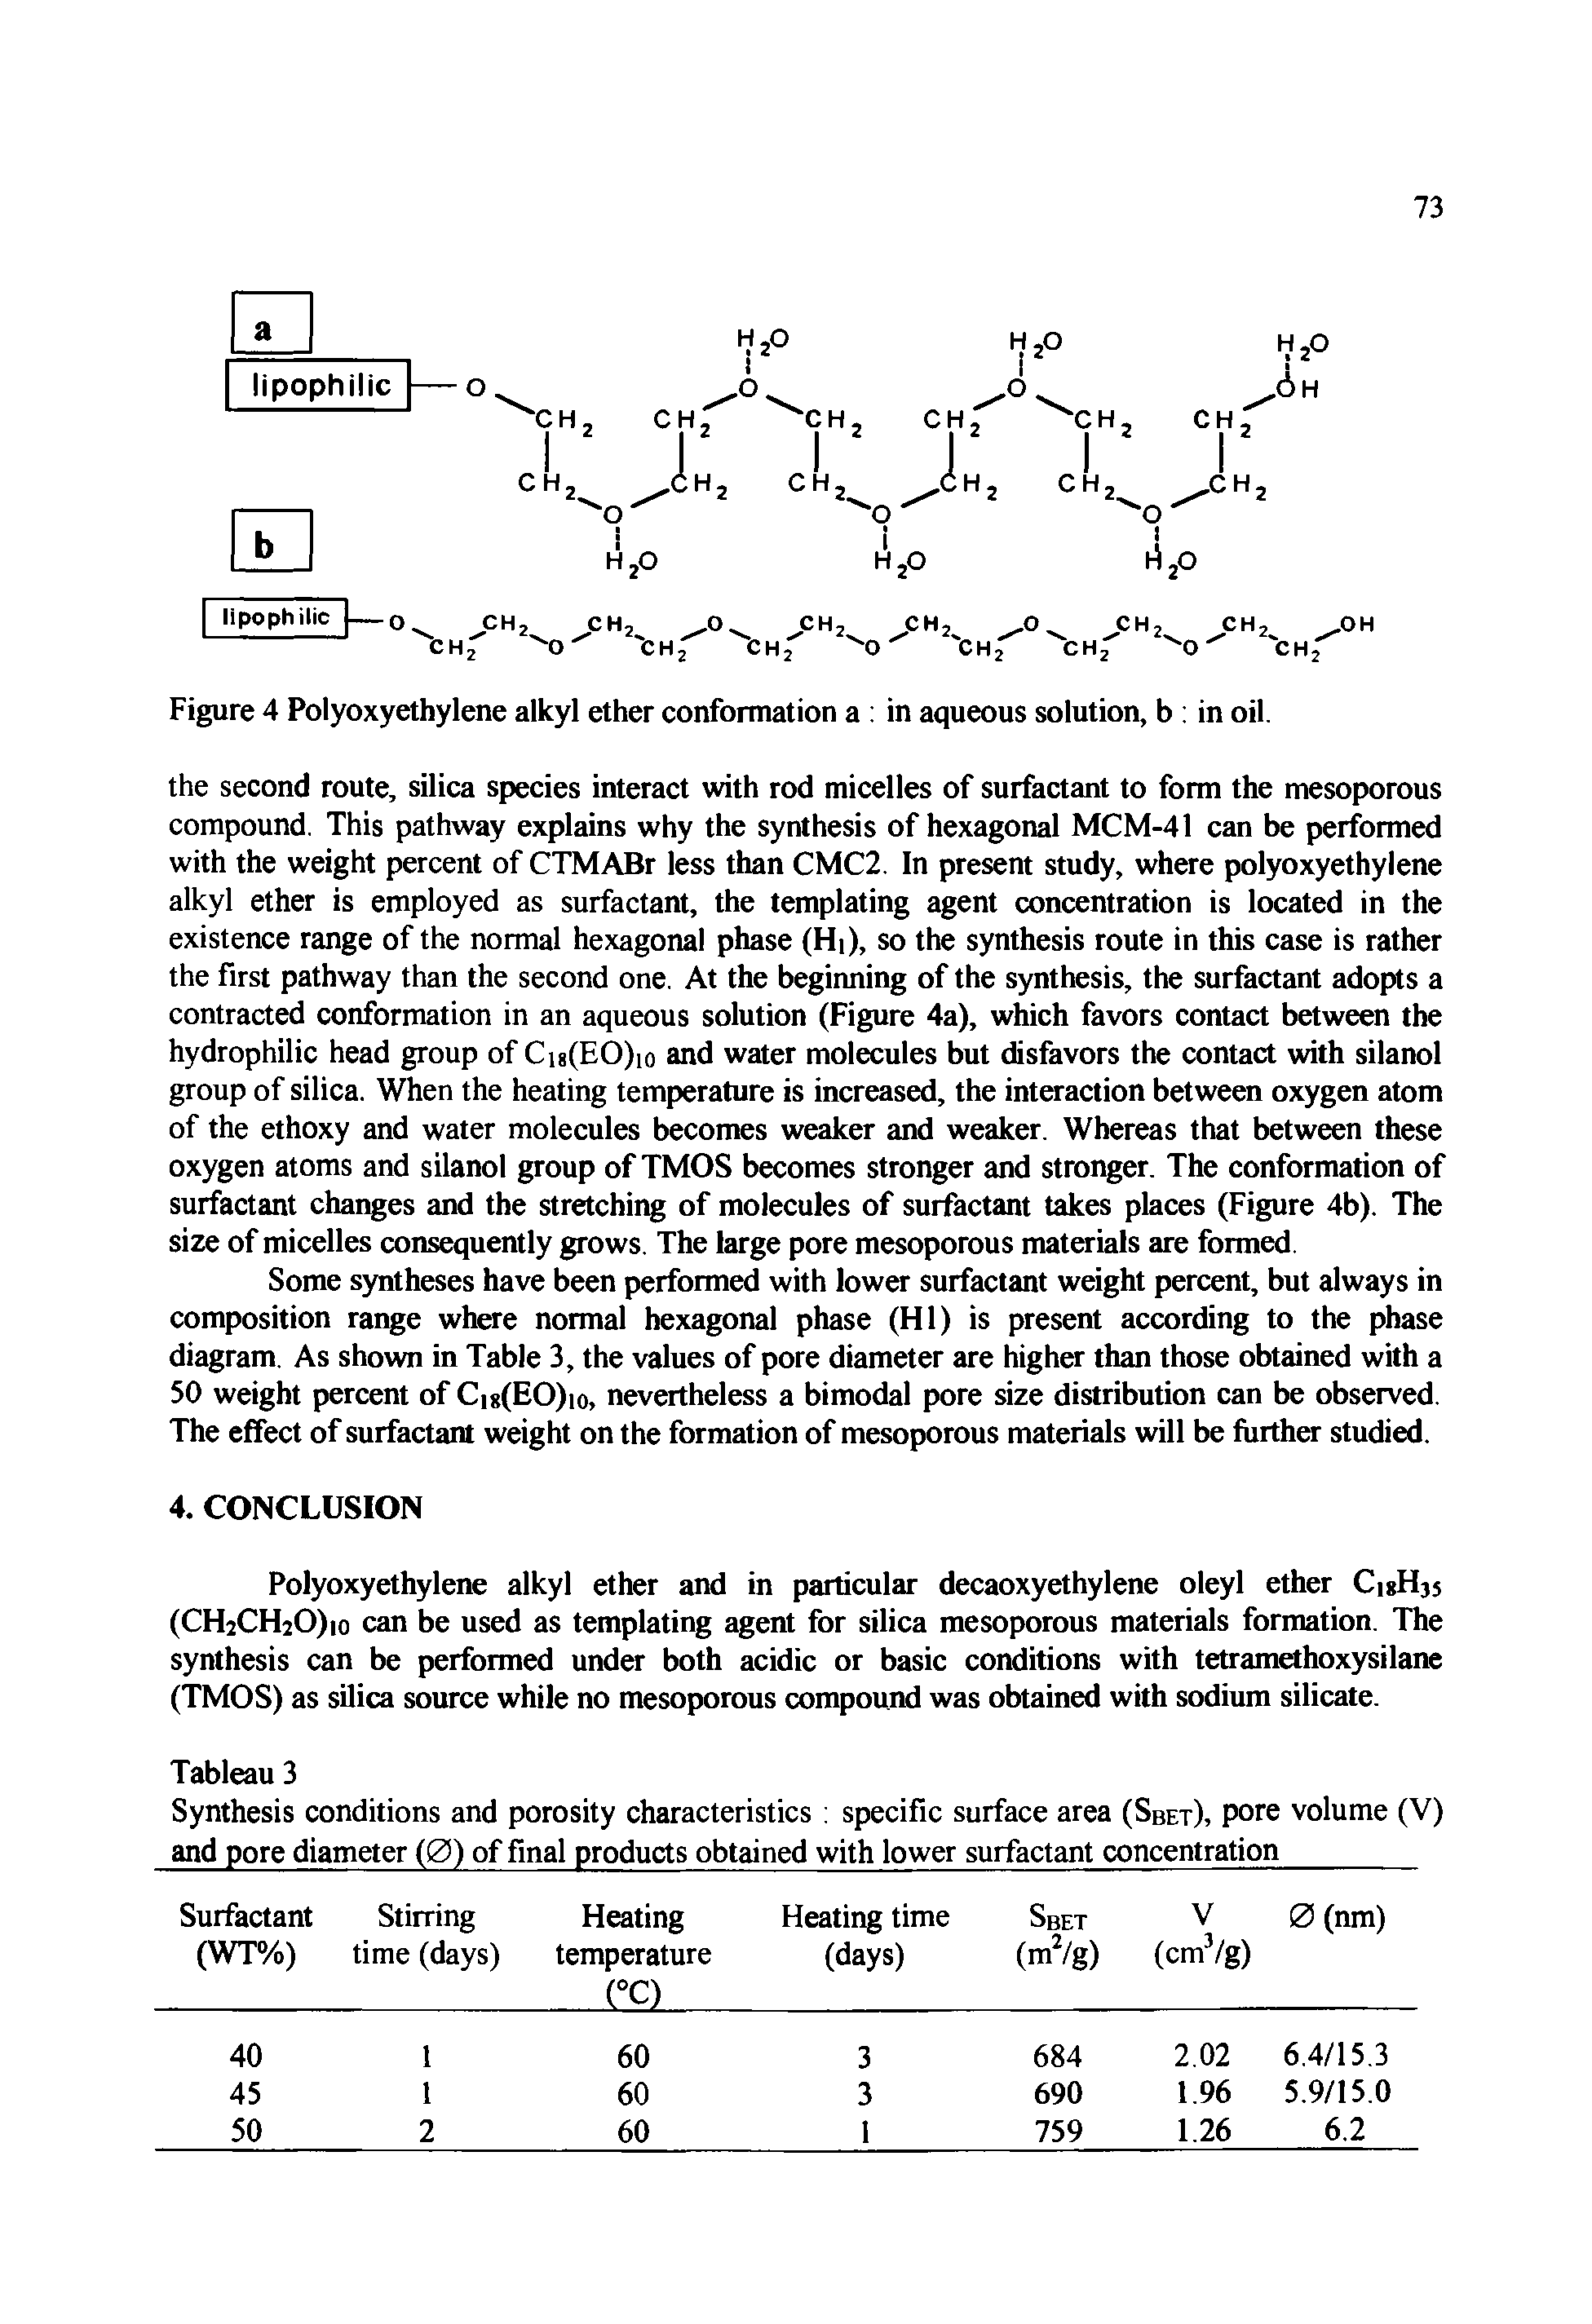 Figure 4 Polyoxyethylene alkyl ether conformation a in aqueous solution, b in oil.